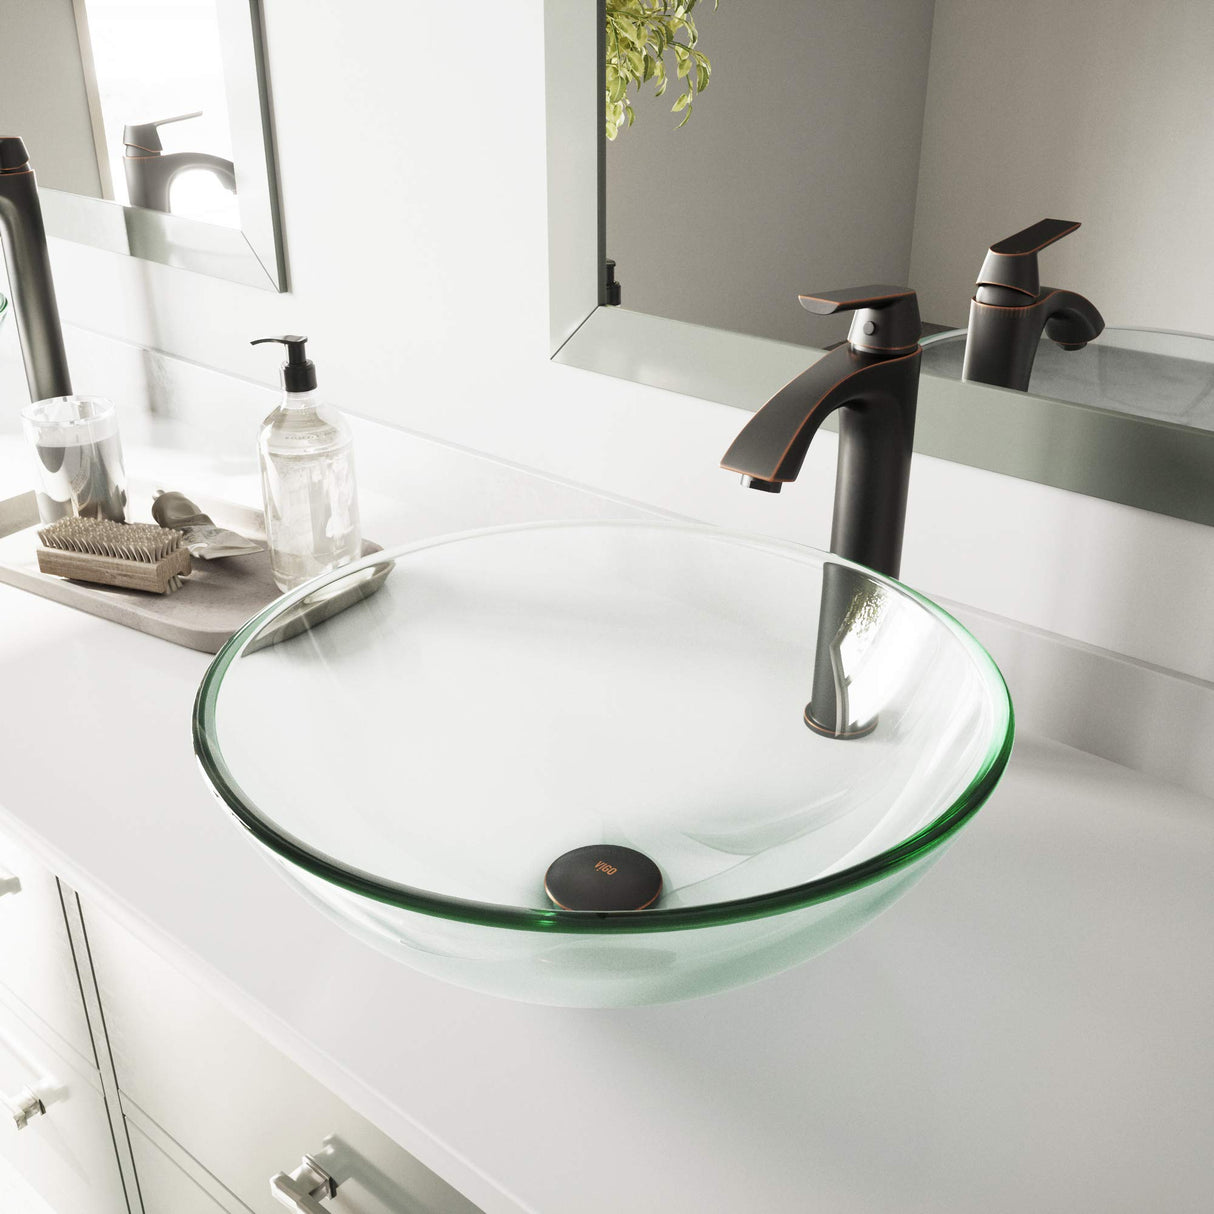 VIGO VGT894 16.5" L -16.5" W -12.38" H Handmade Countertop Glass Round Vessel Bathroom Sink Set in Iridescent Finish with Antique Rubbed Bronze Single-Handle Single Hole Faucet and Pop Up Drain